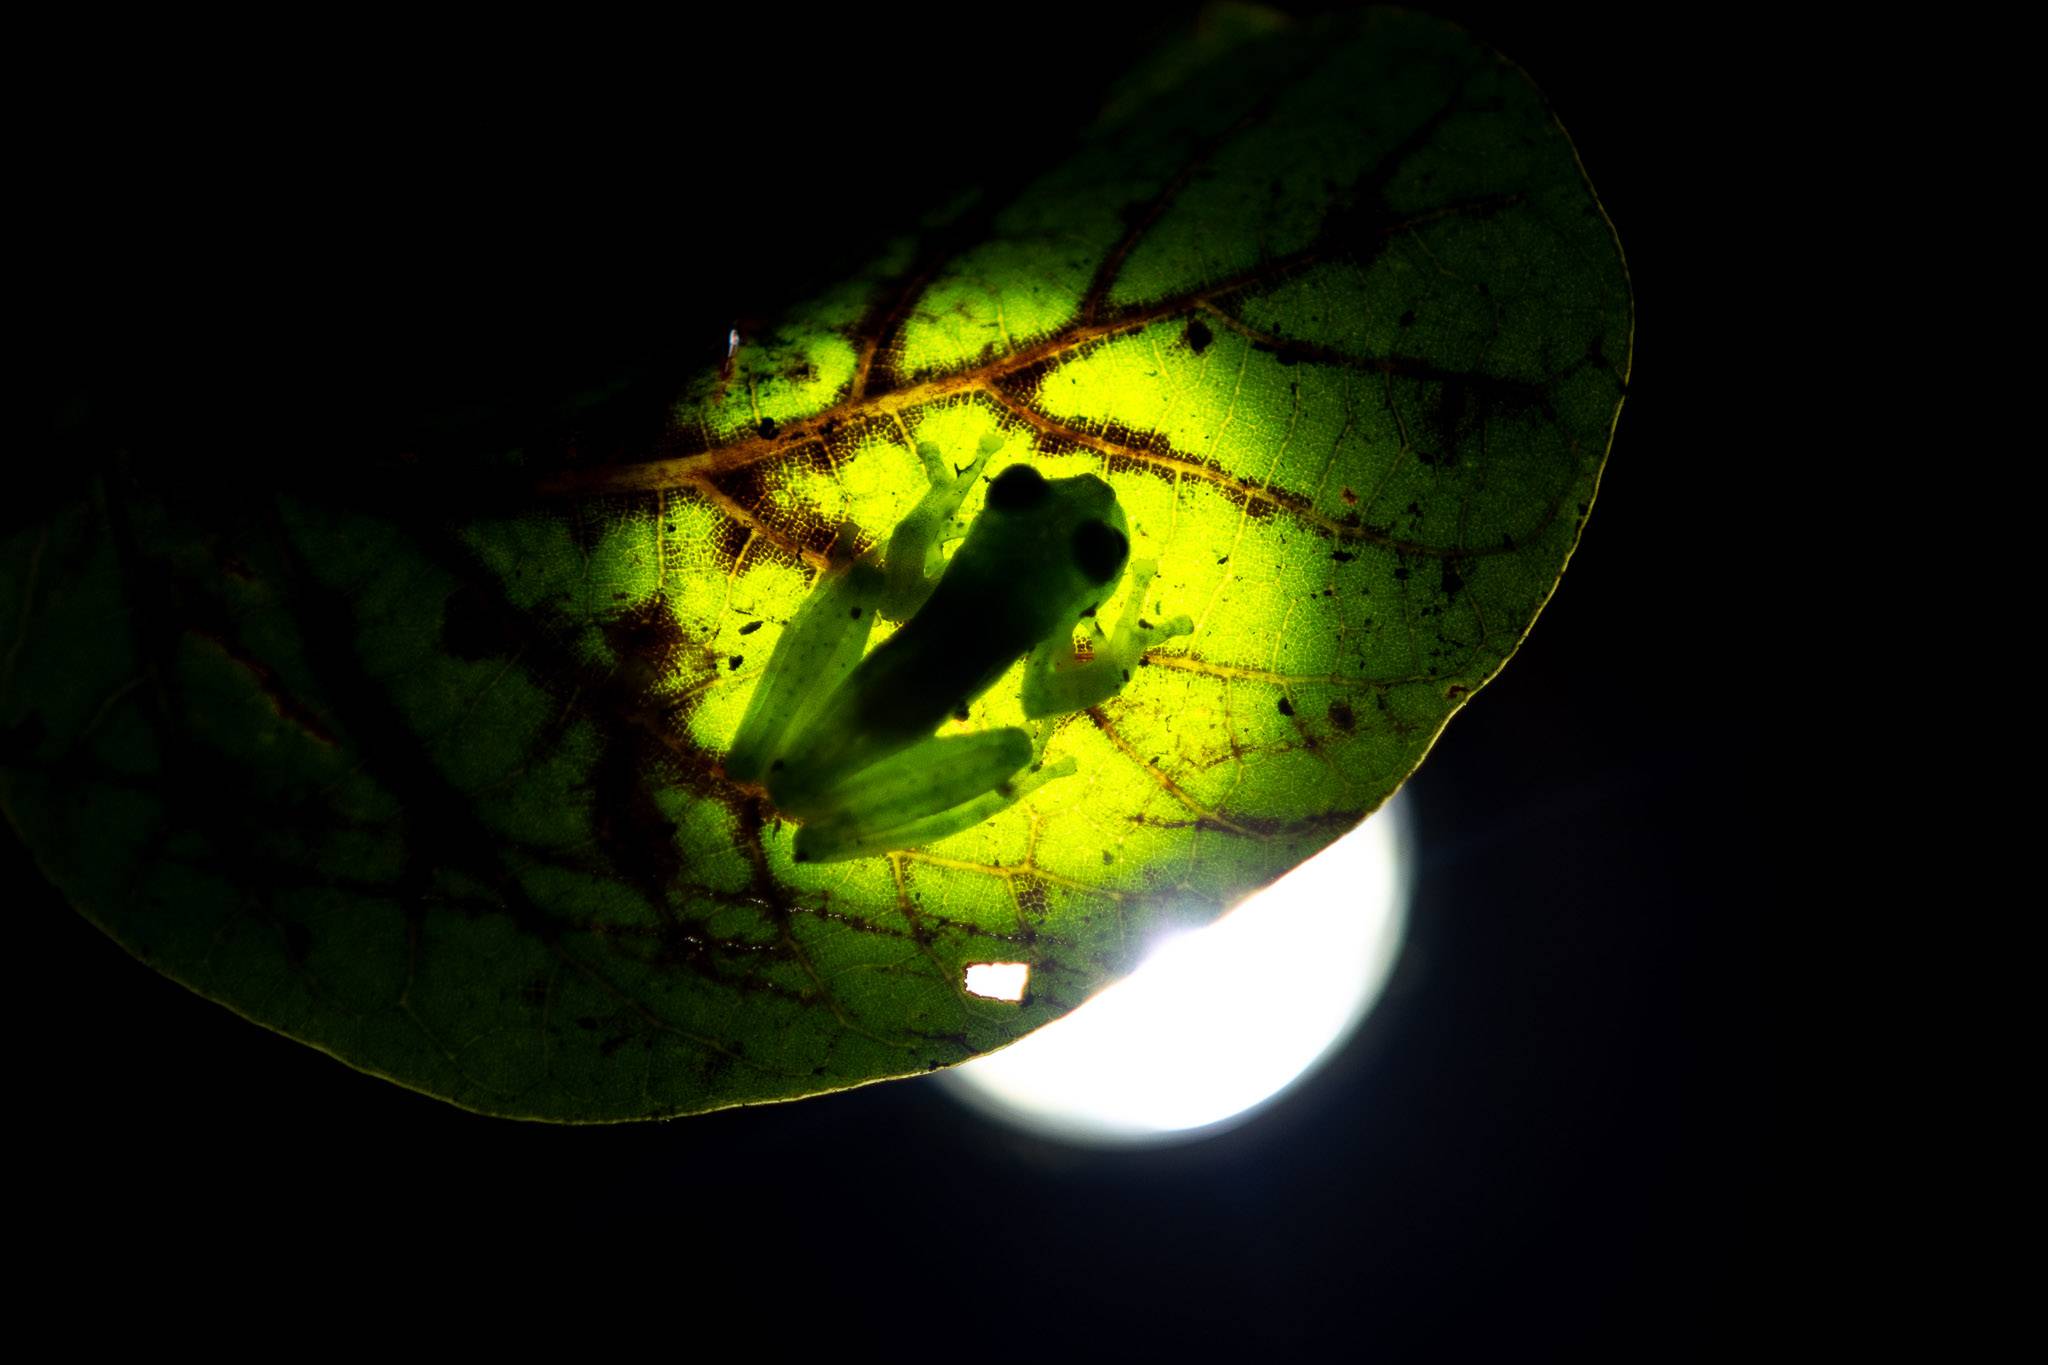 Glass Frog: Join a night walk to see this